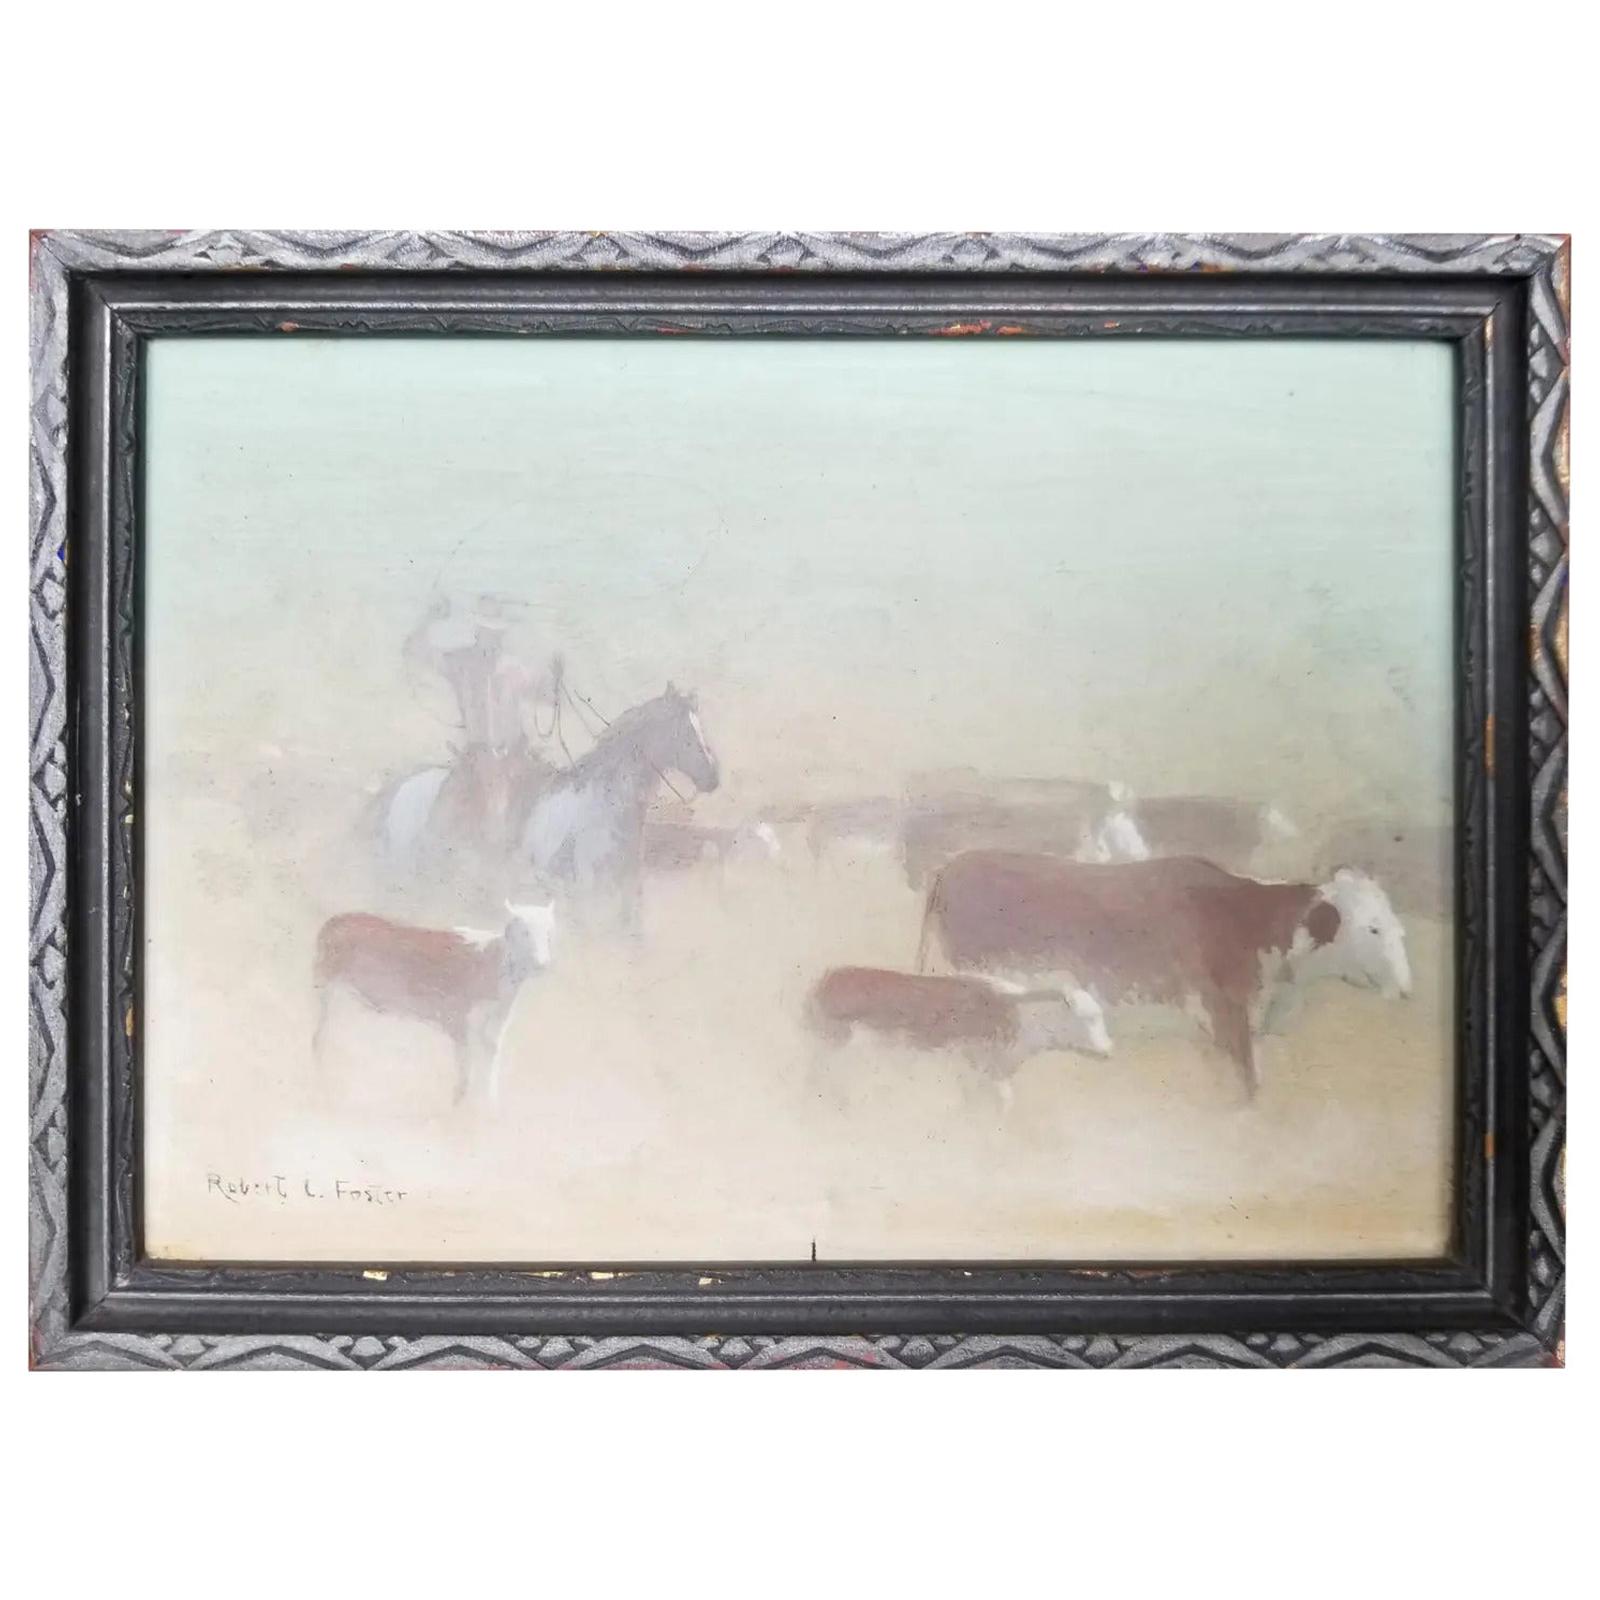 Cowboy Painting by Robert L. Foster For Sale